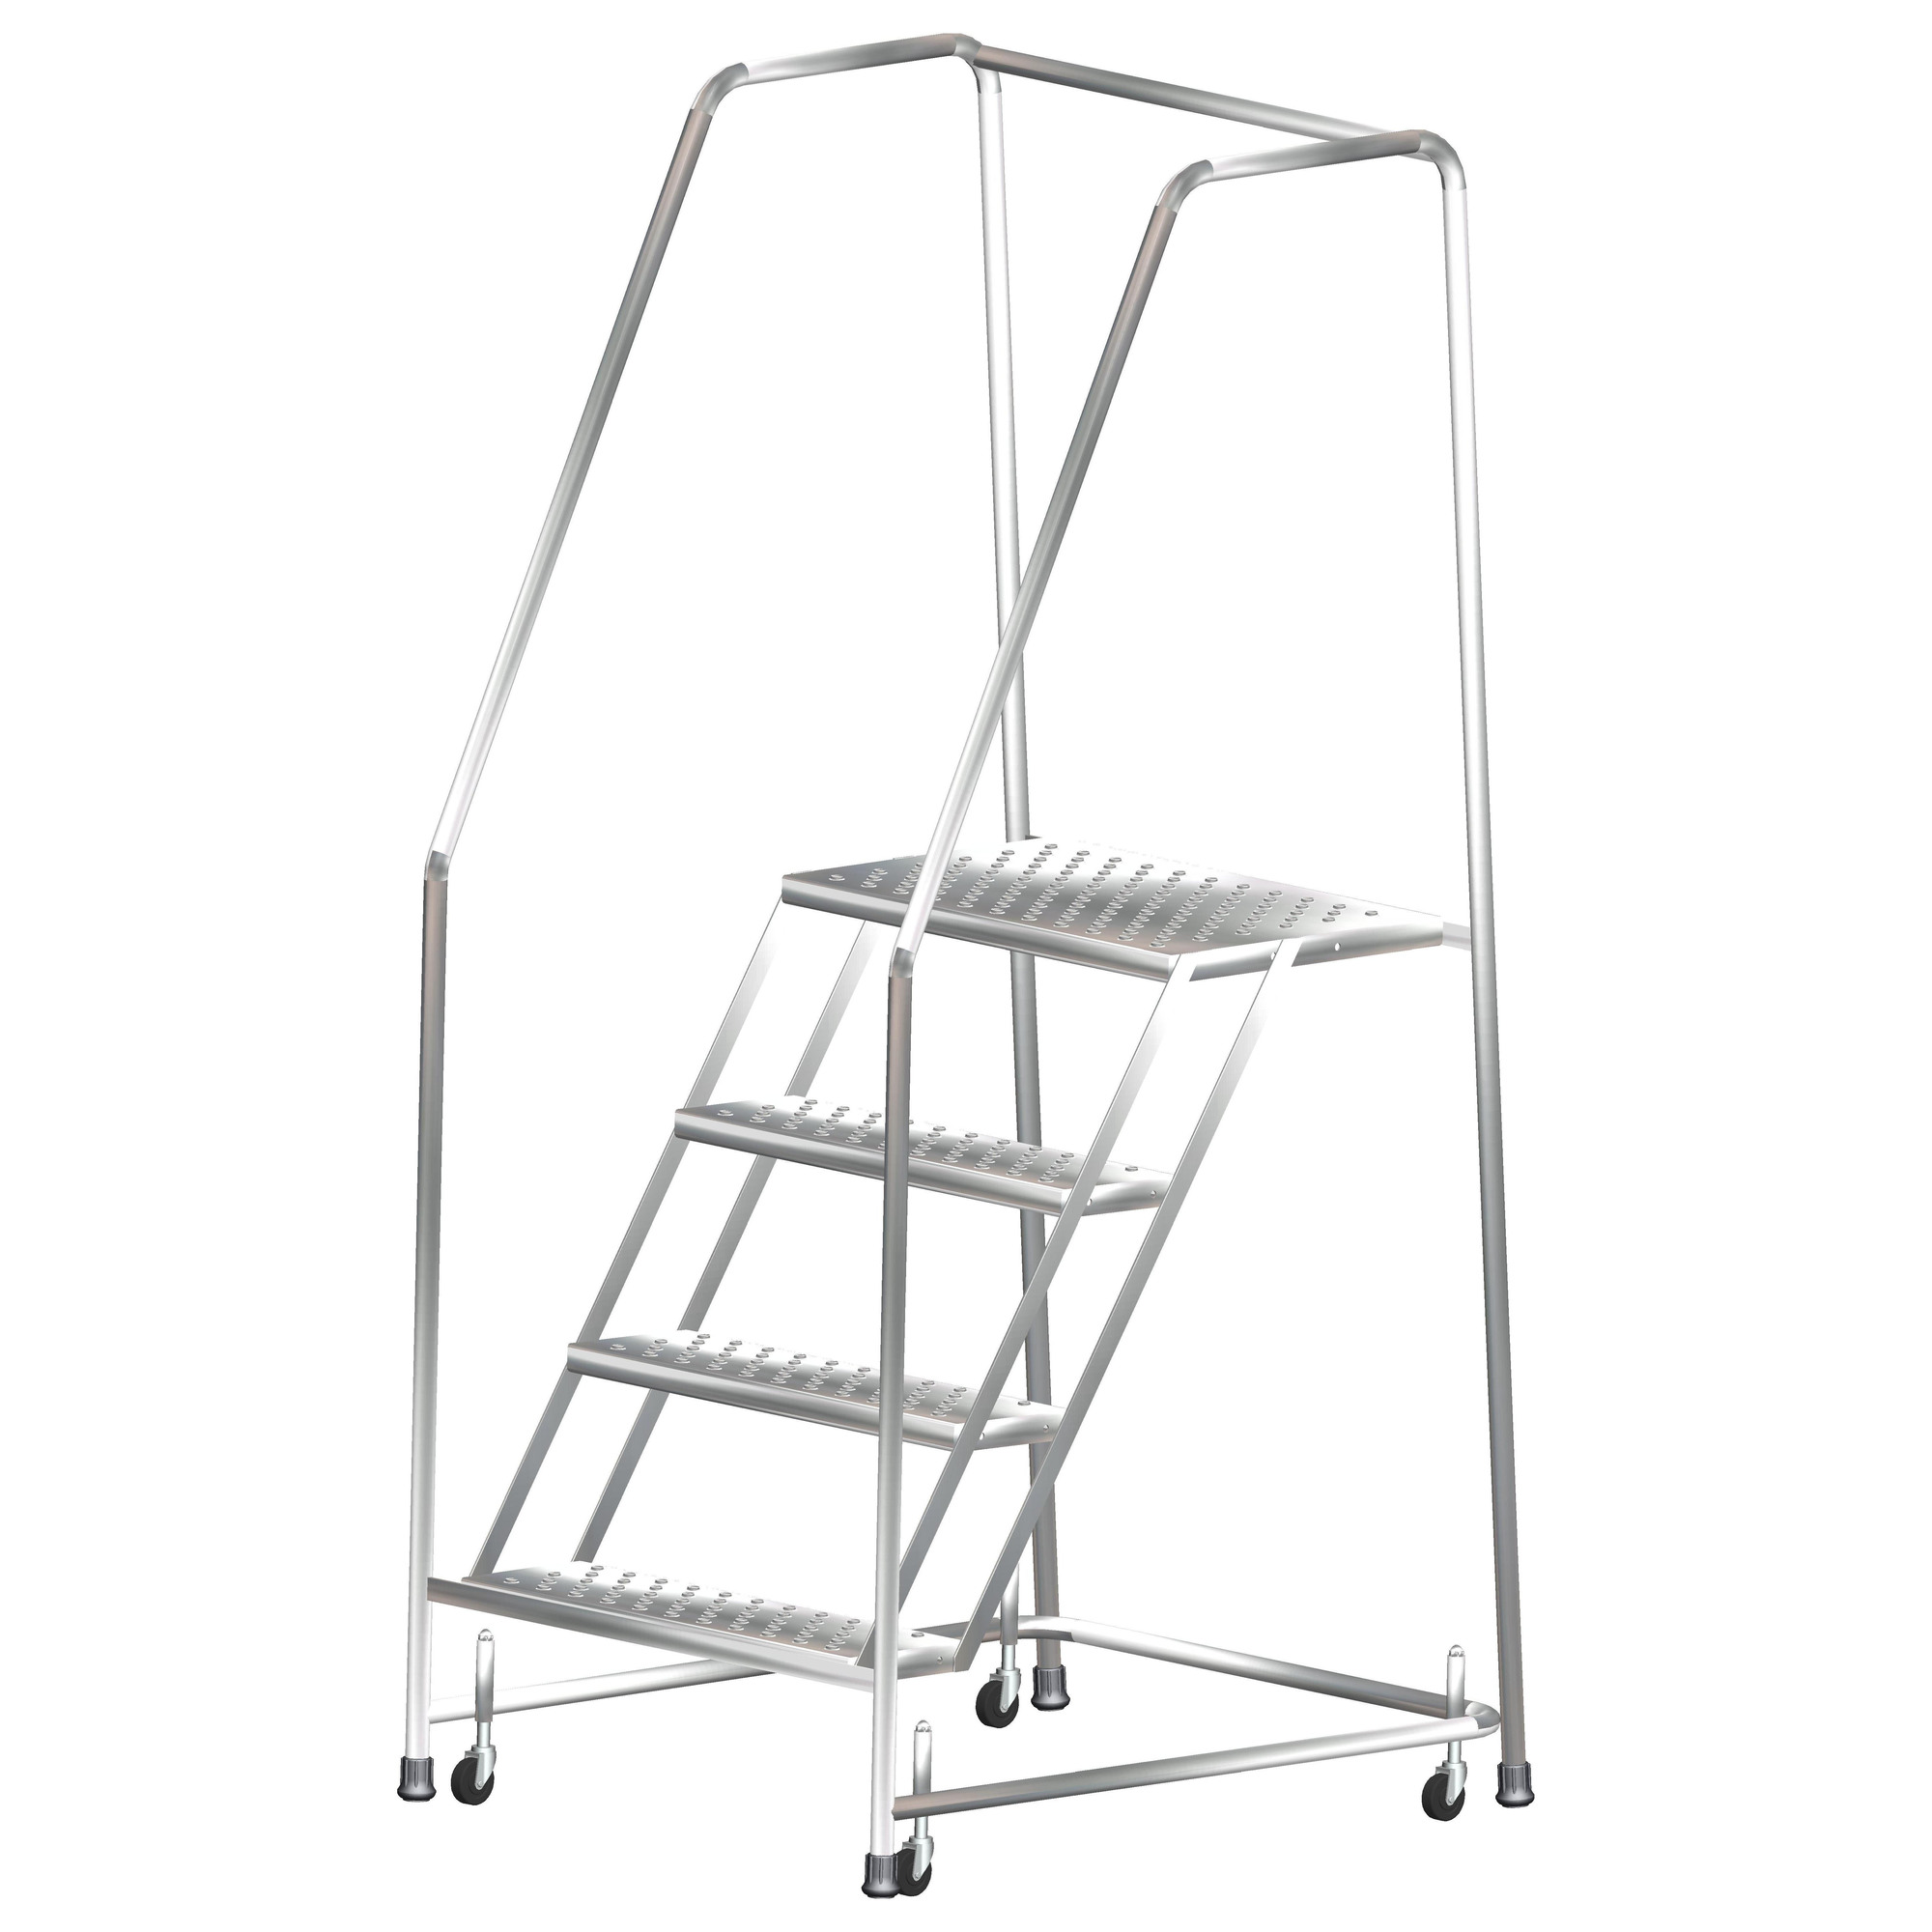 Ballymore, Stainless Steel Rolling Ladder, Overall Height 73 in, Steps 4, Material Stainless Steel, Model SS430P